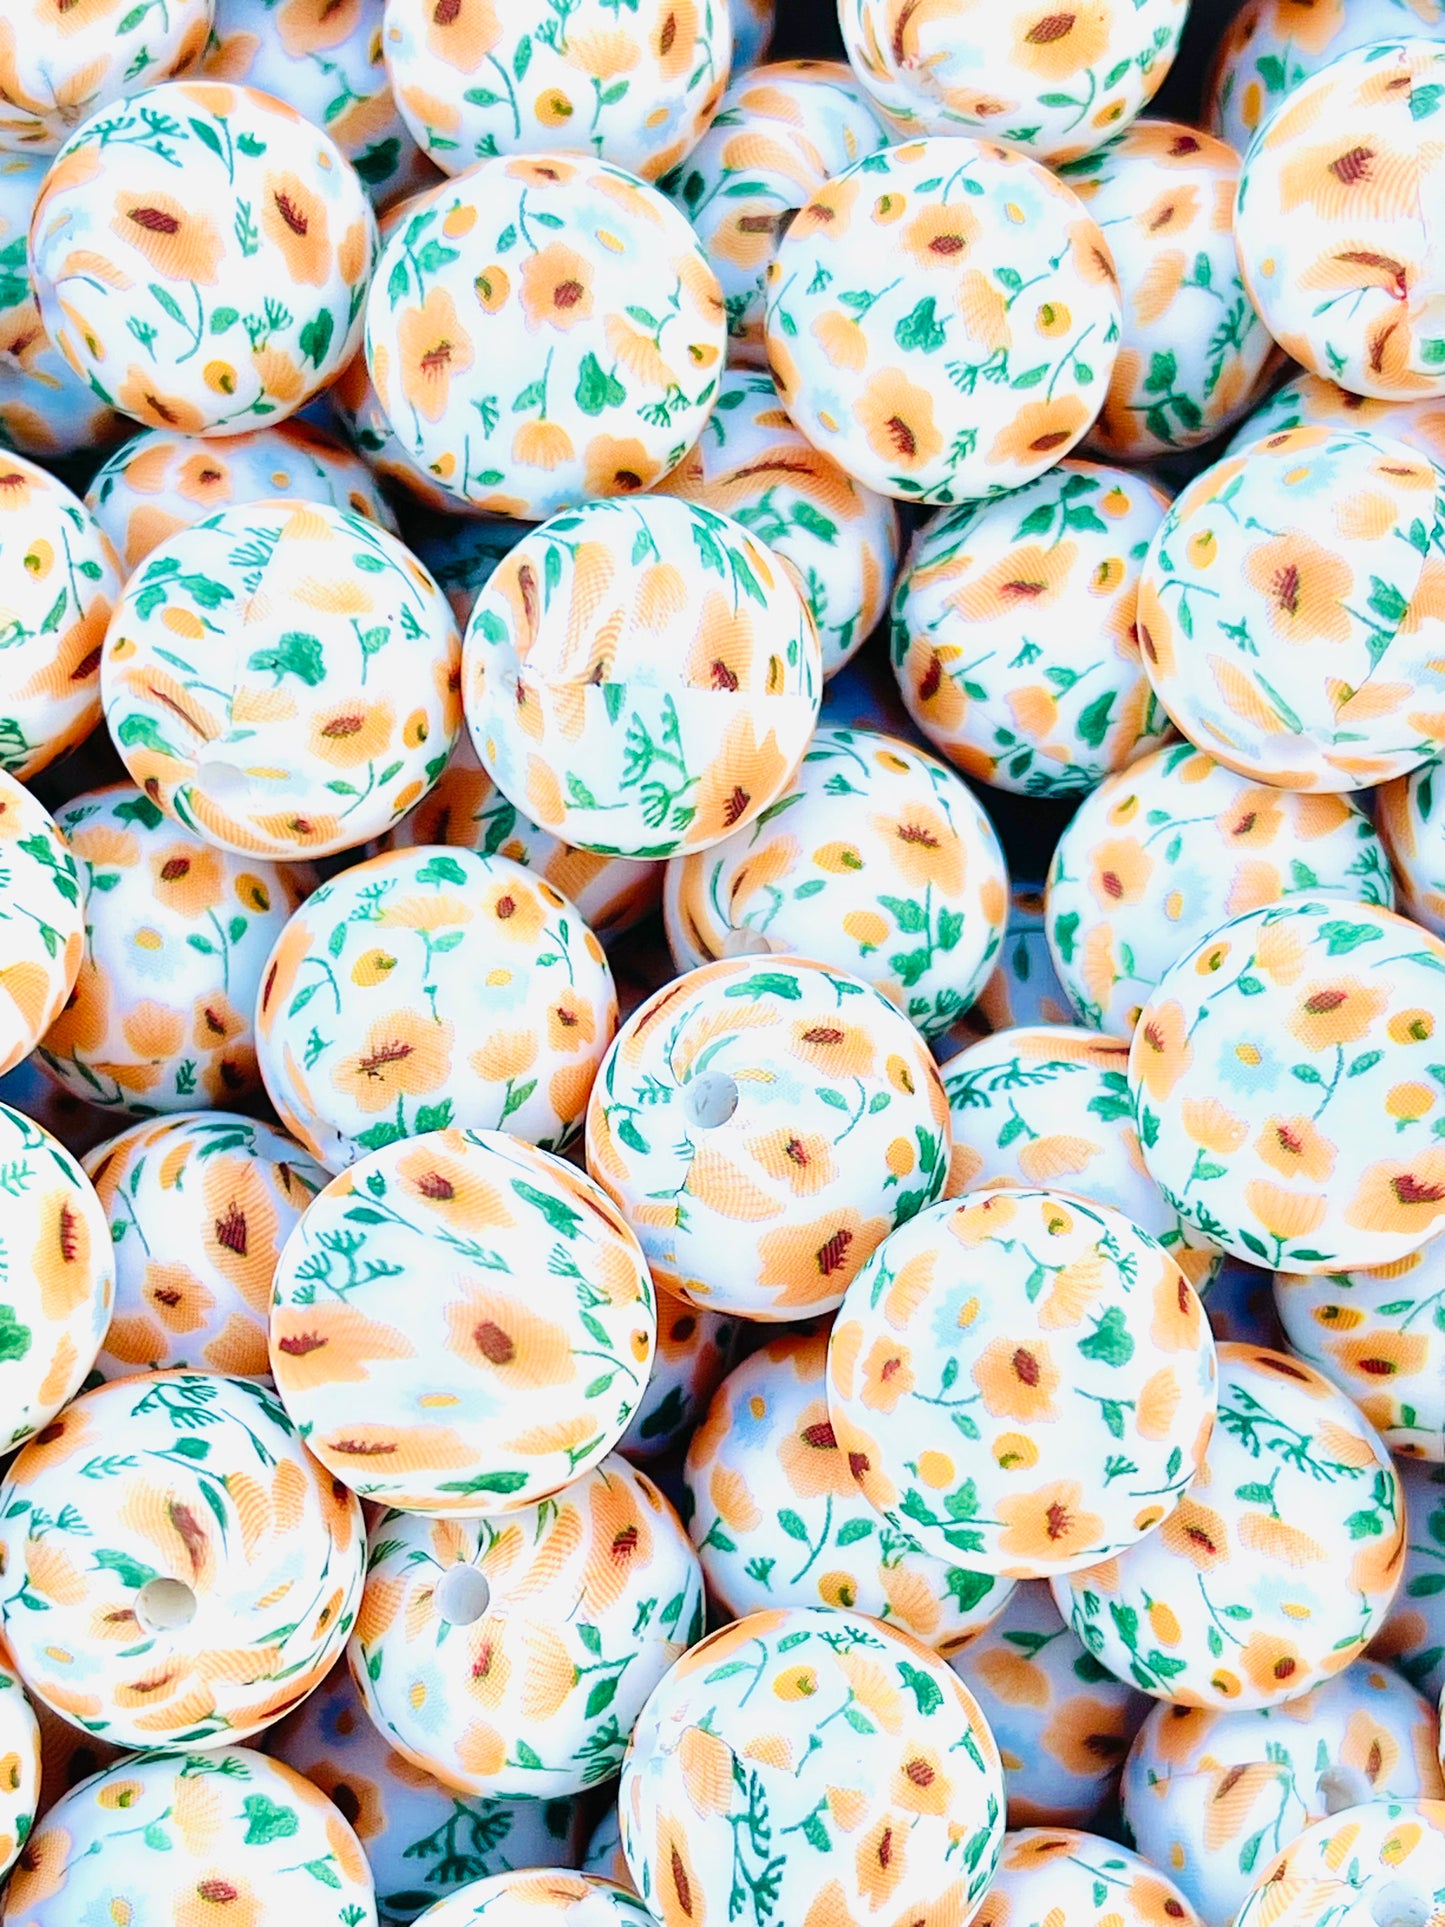 Dazzling Daisy Printed Silicone Beads 15mm | Flower Beads